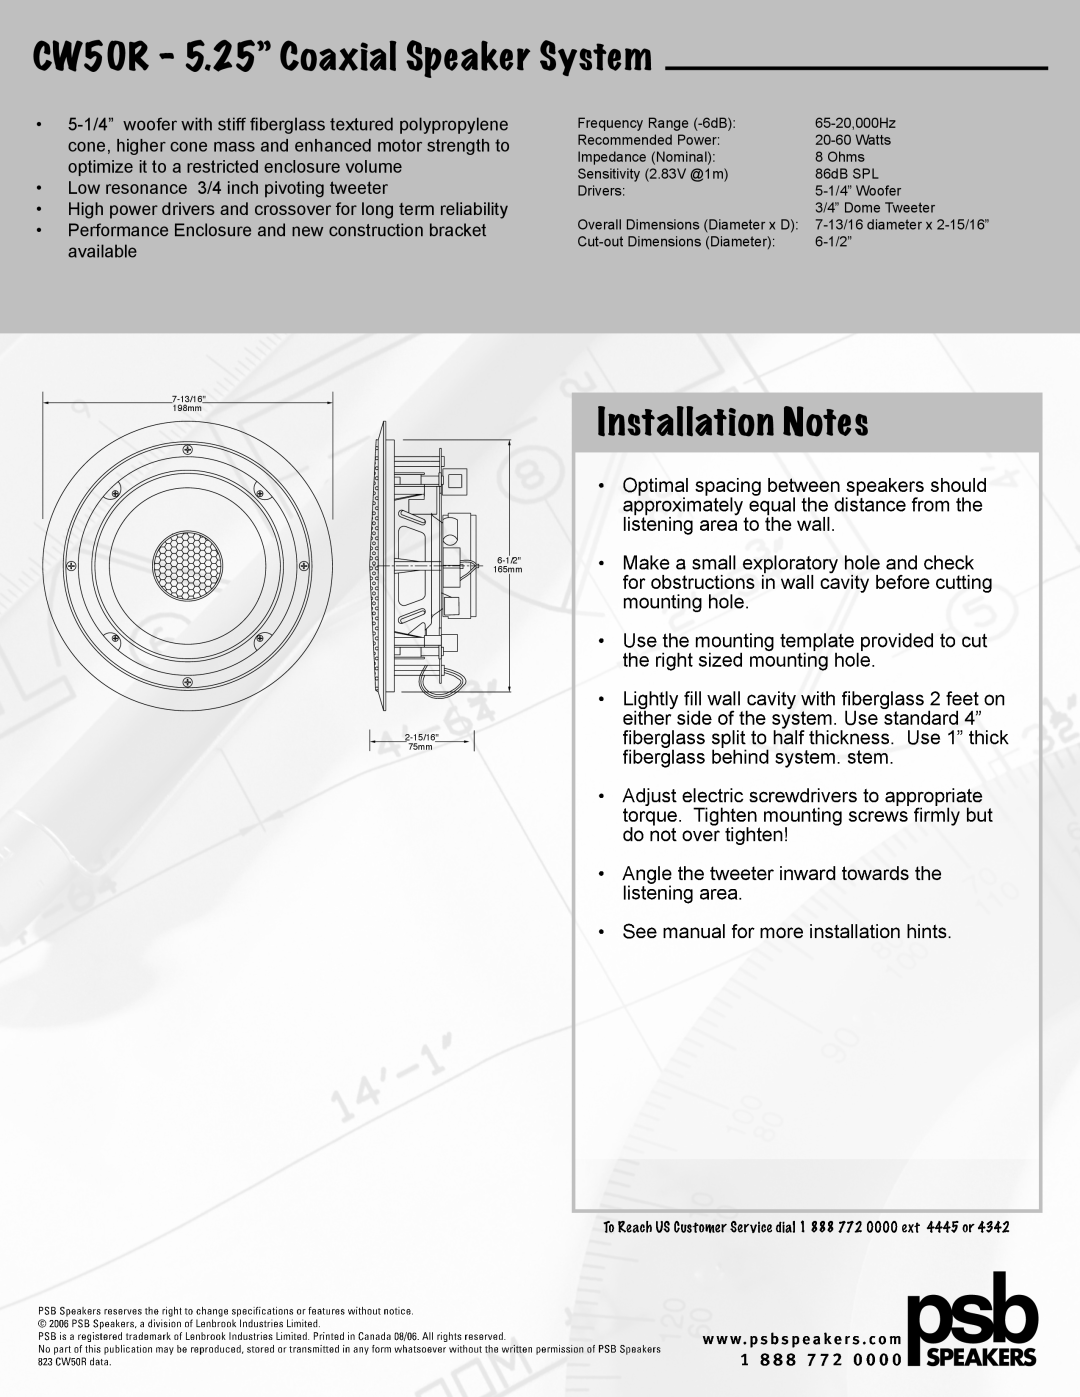 PSB Speakers manual CW50R - 5.25” Coaxial Speaker System, Installation Notes 